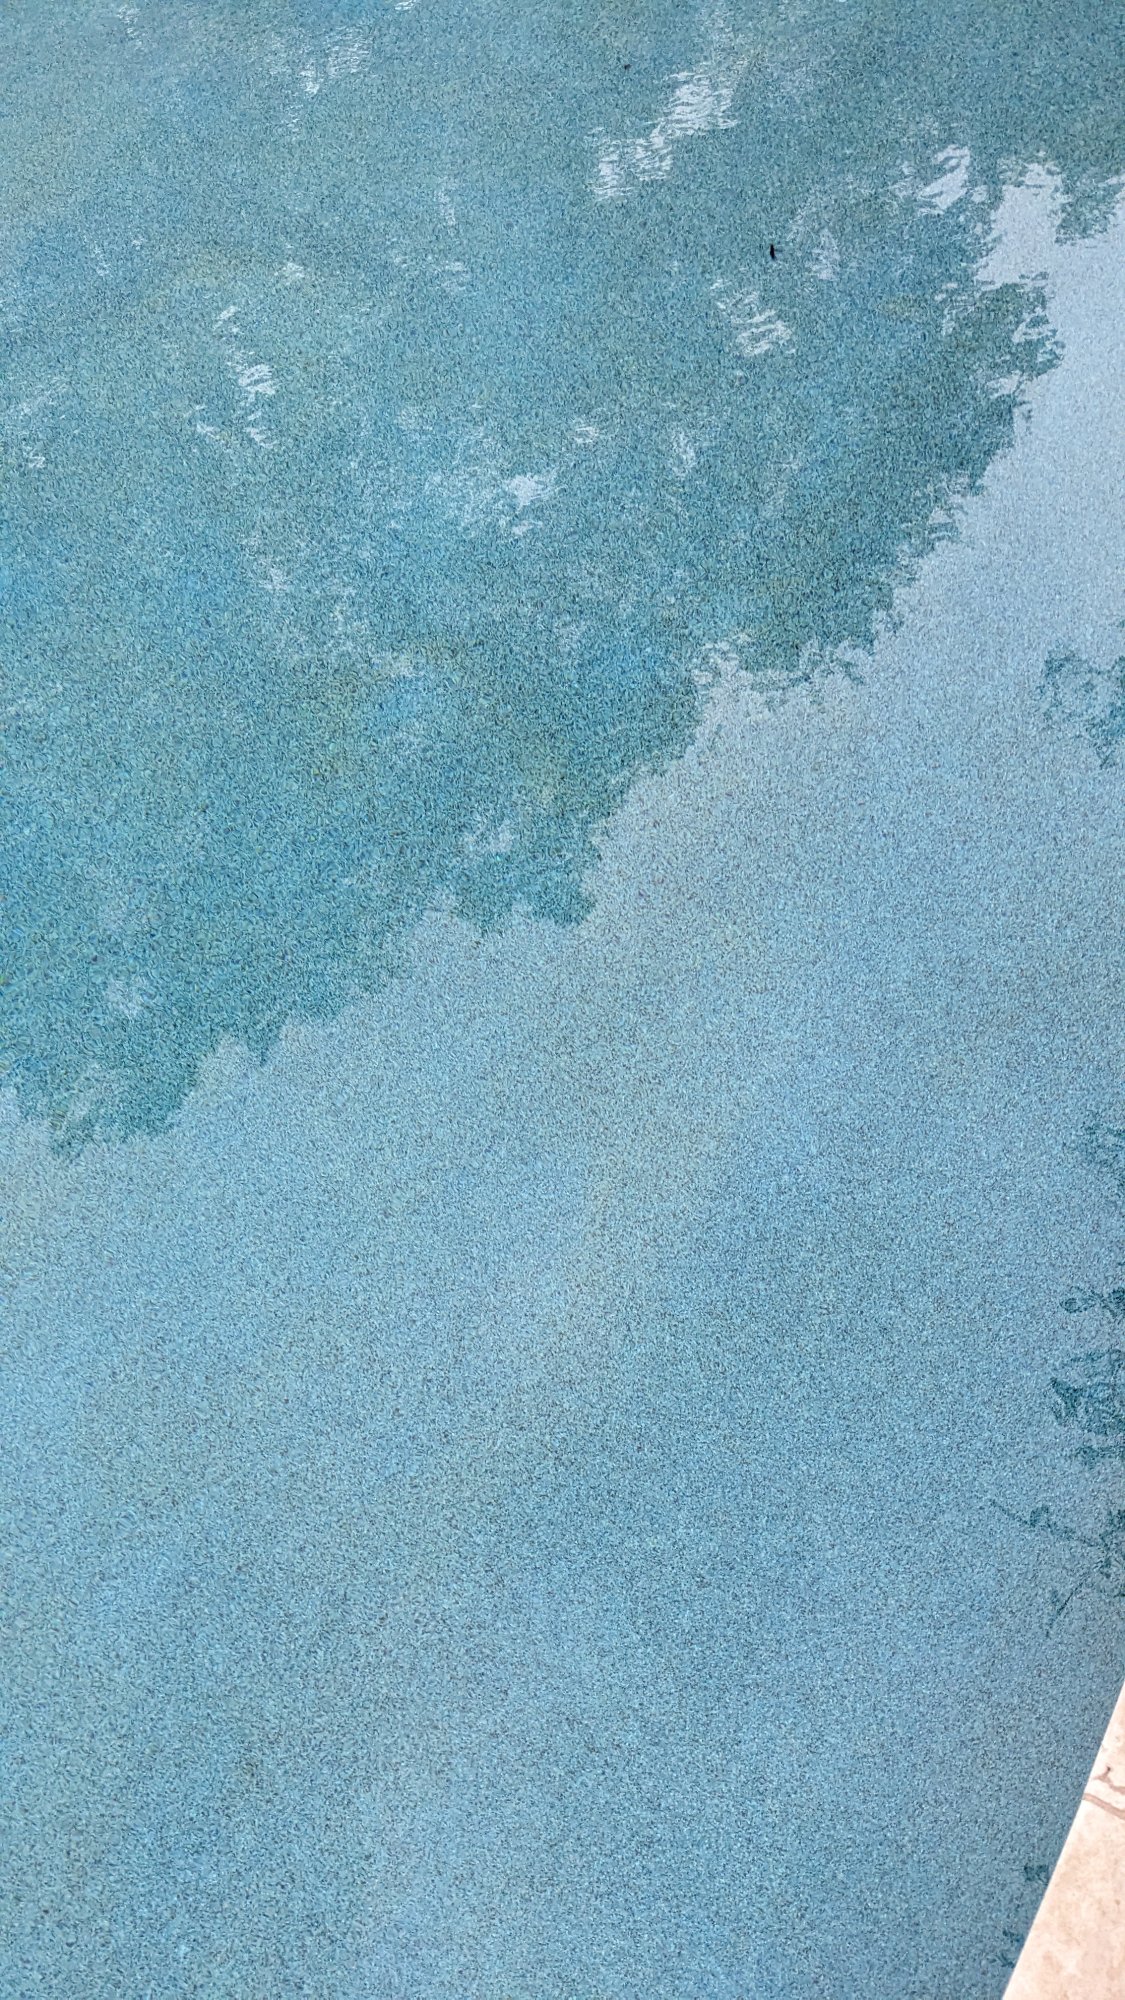 Filled pool with discoloration.jpg